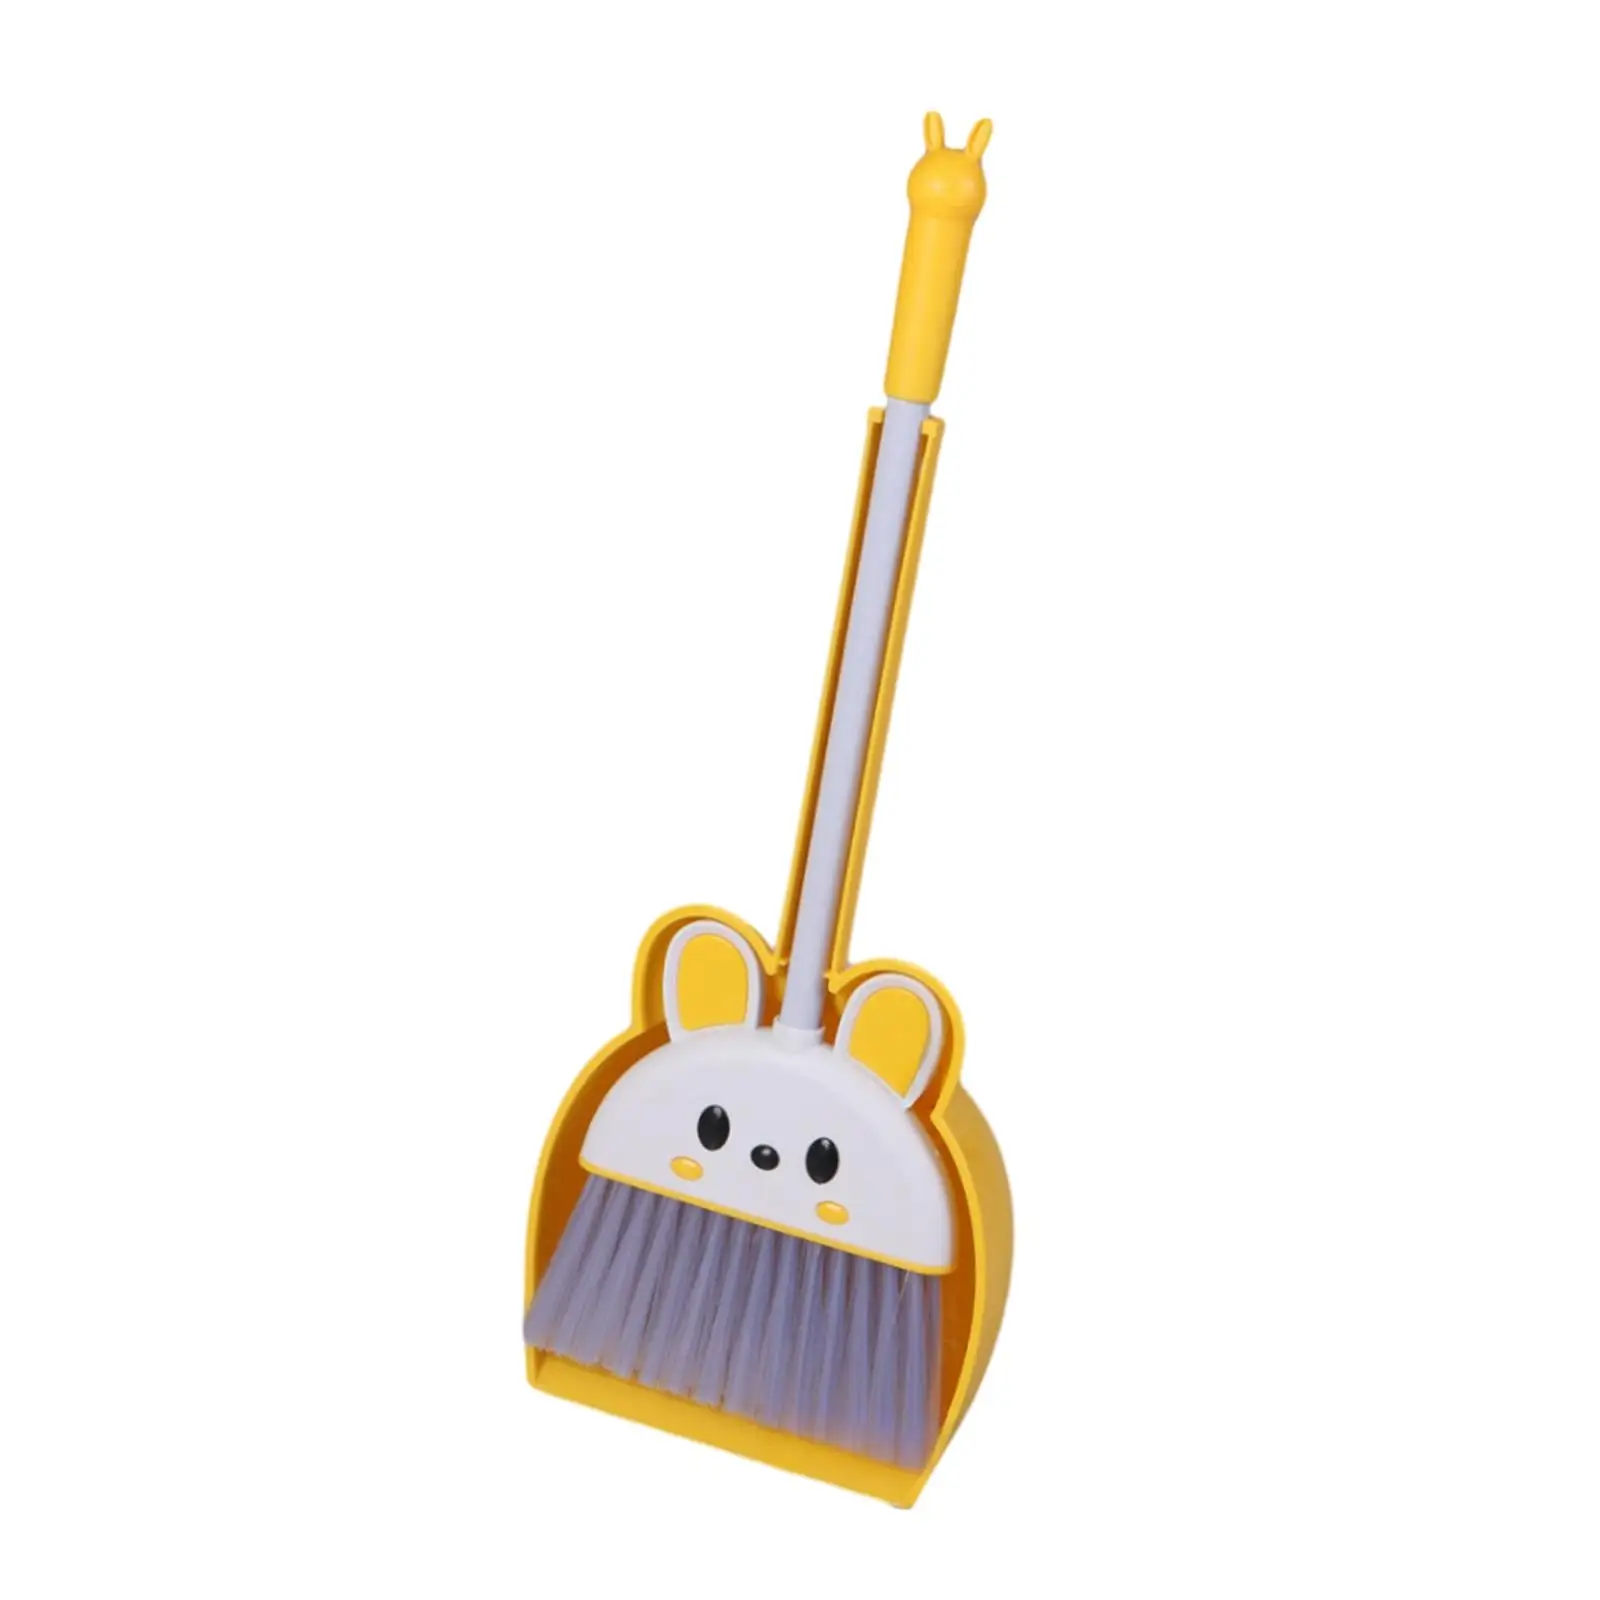 Kids Cleaning Set Educational Role Playing Mini Broom and Dustpan Set for Kids for Preschool Kindergarten Age 3-6 Years Old